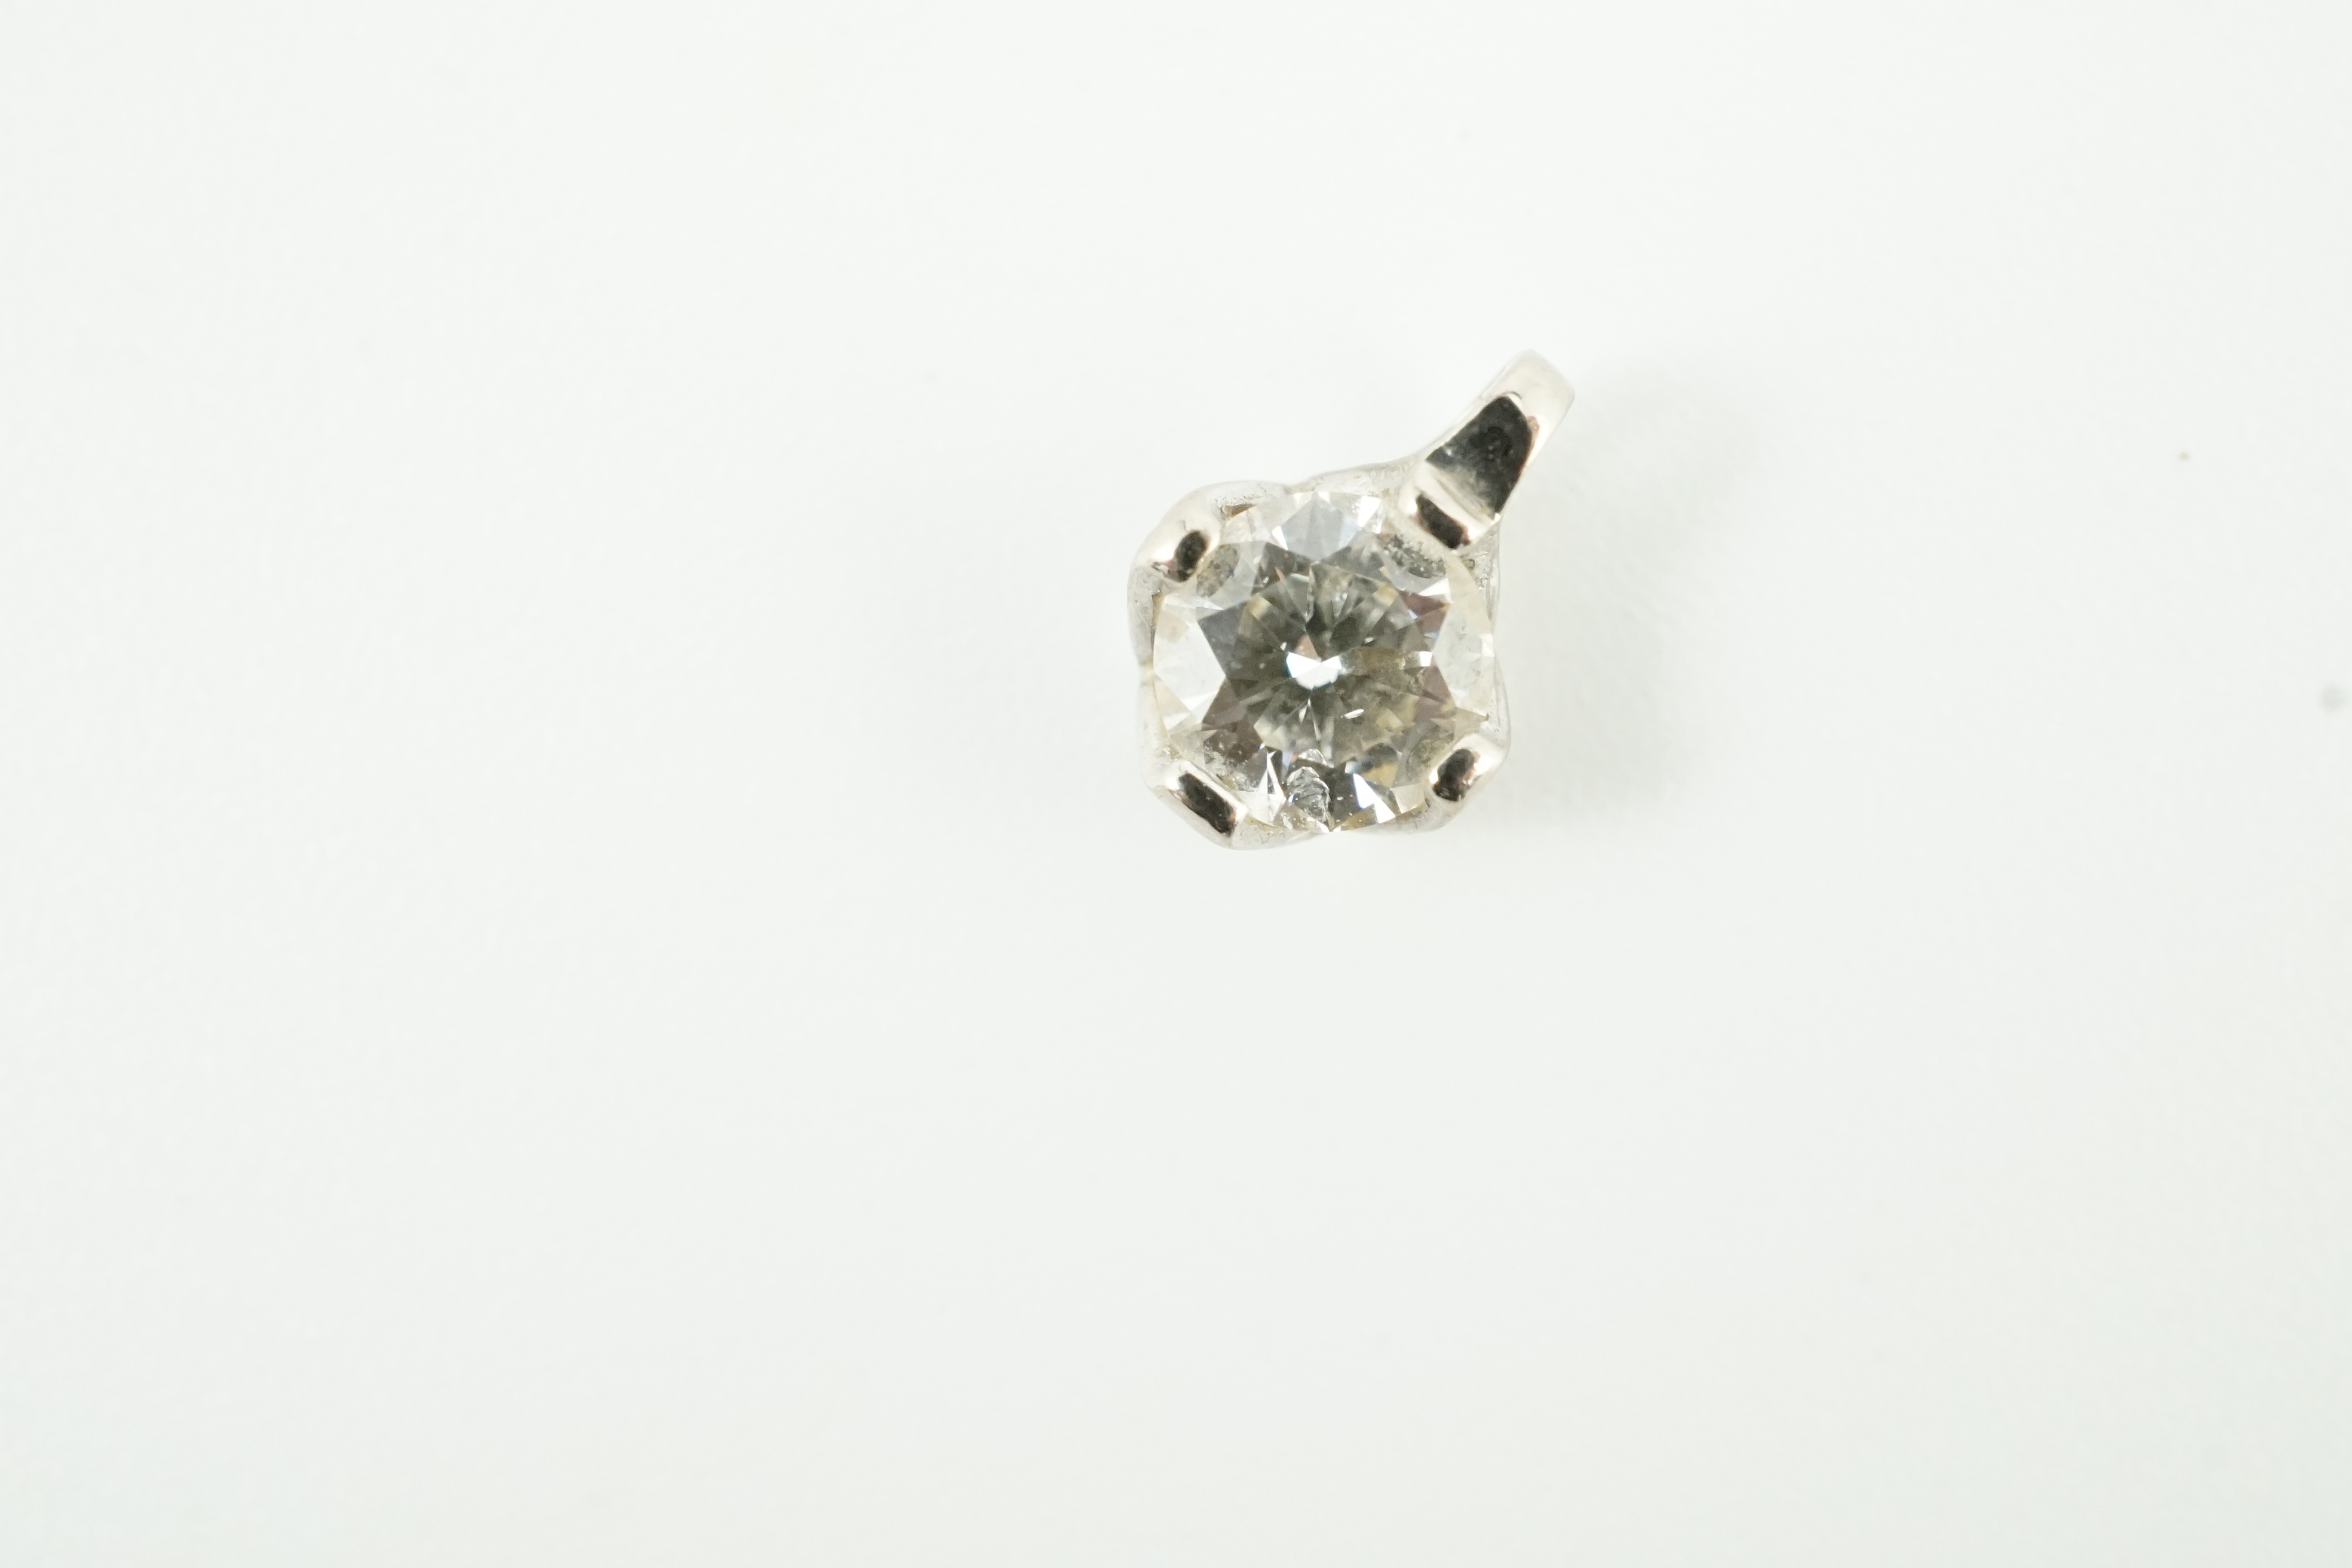 A modern 18ct white gold and solitaire diamond set pendant, gross weight 0.4 grams, stone diameter 5.1mm.